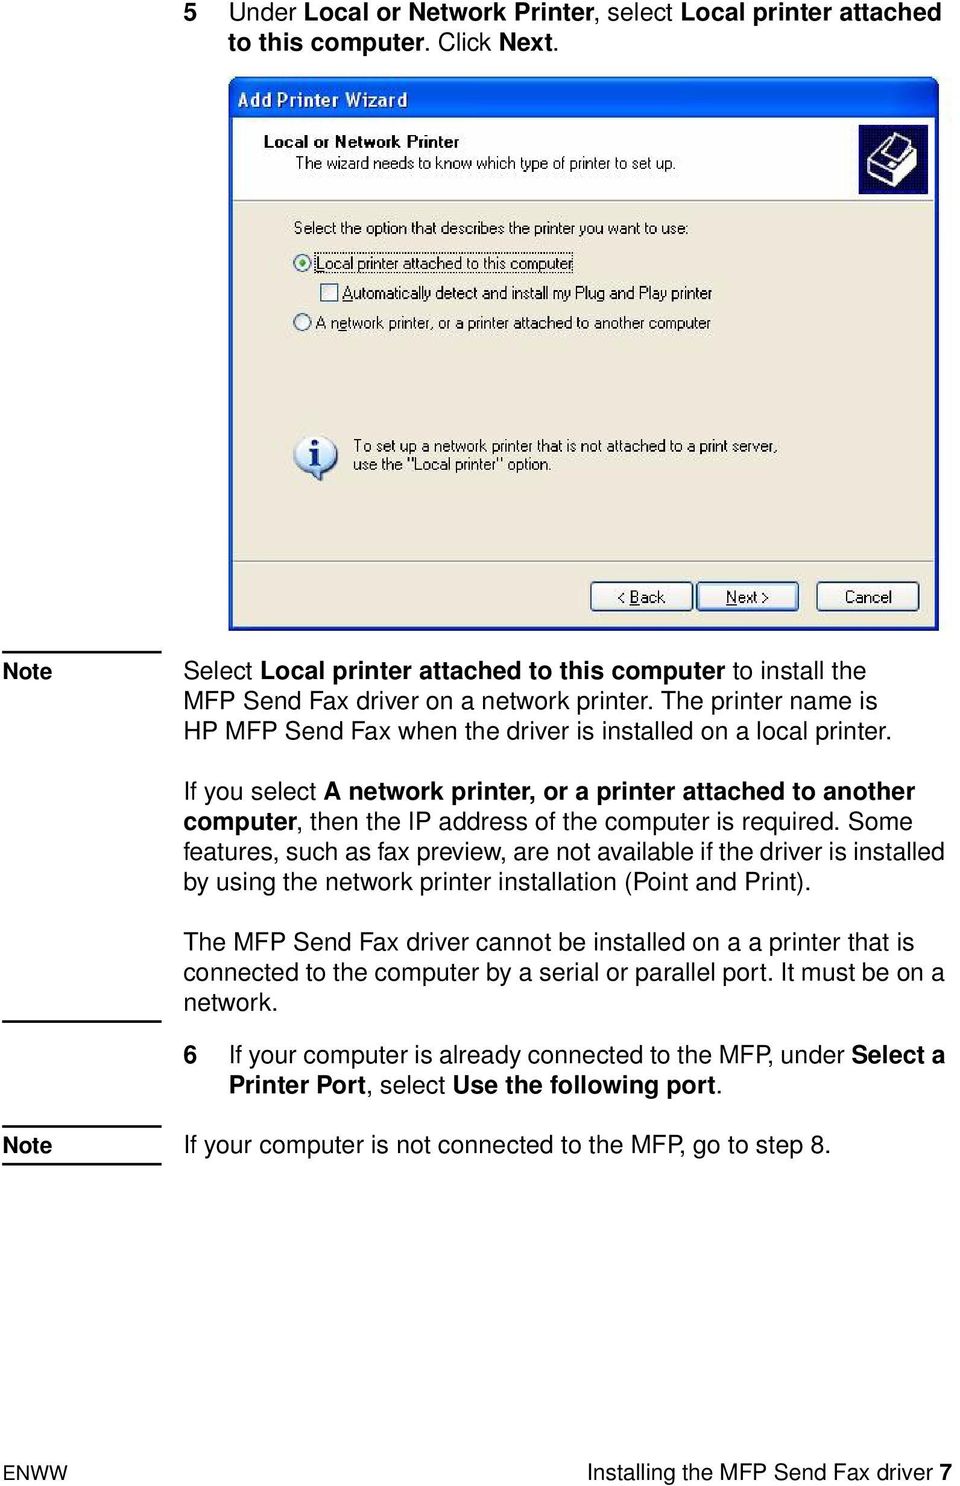 If you select A network printer, or a printer attached to another computer, then the IP address of the computer is required.